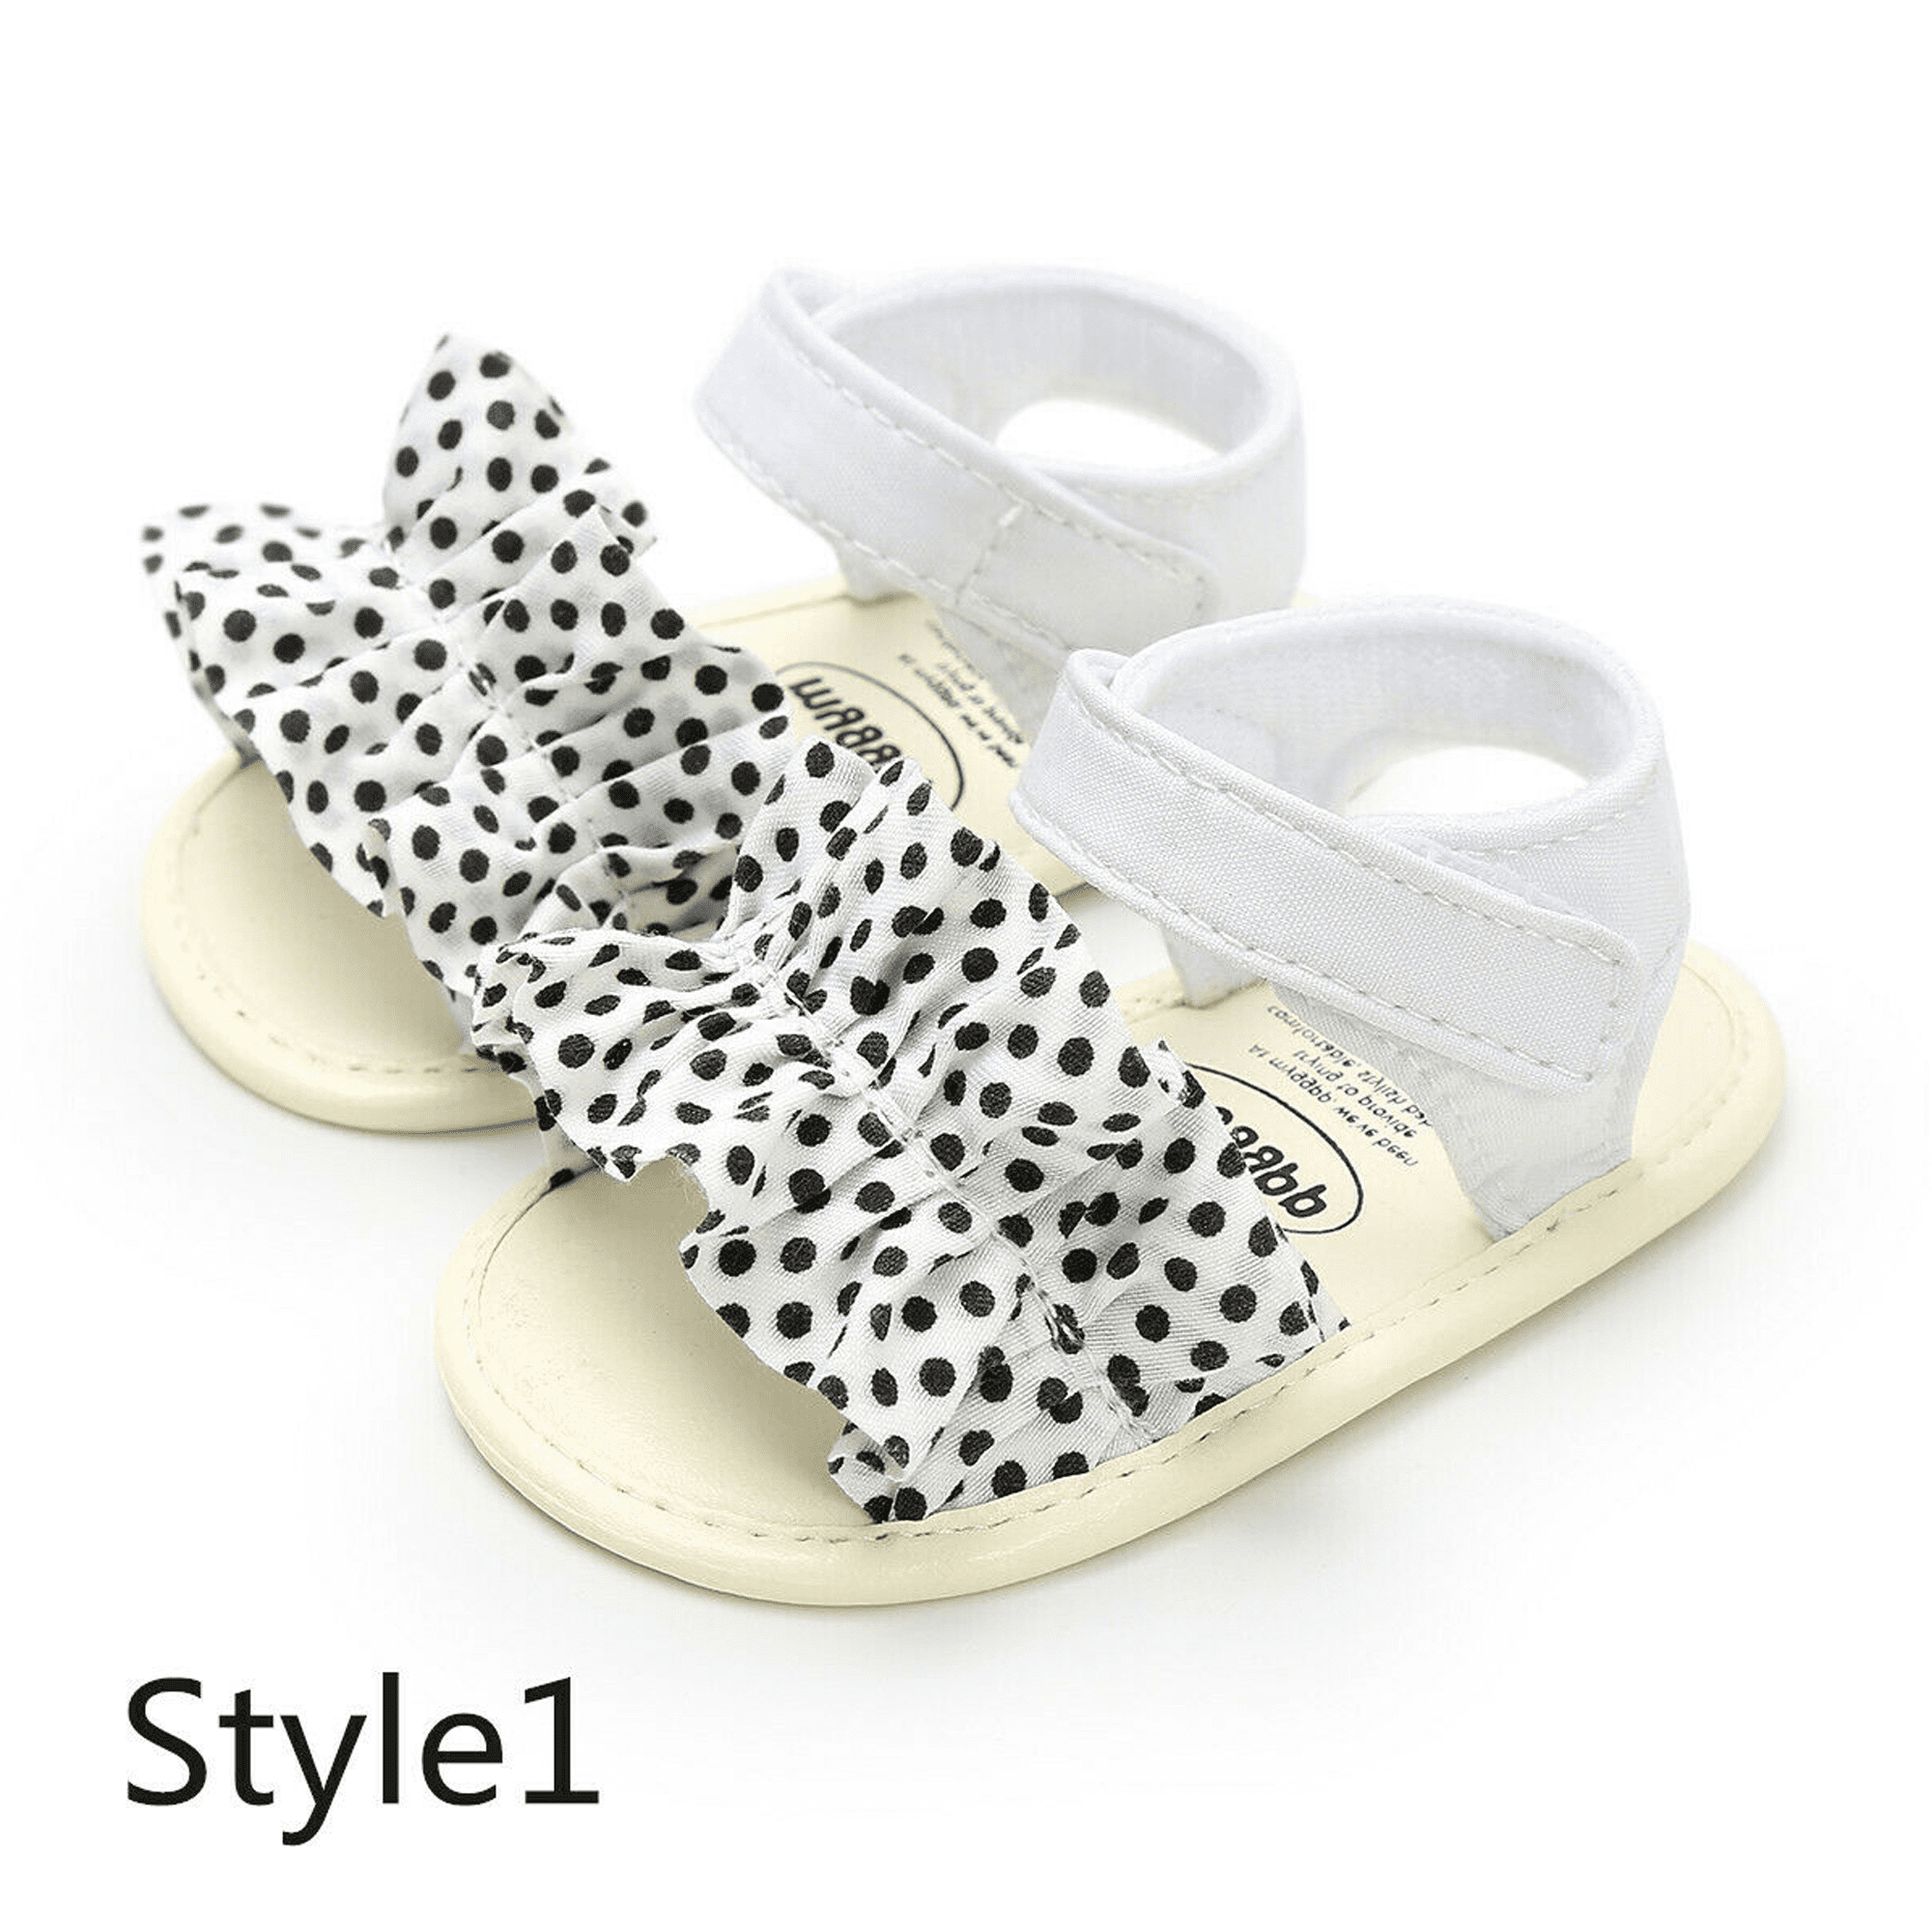 Baby Boys and Girls Summer Unisex Kids Leather Sandals Anti-Slip Rubber Sole Outdoor